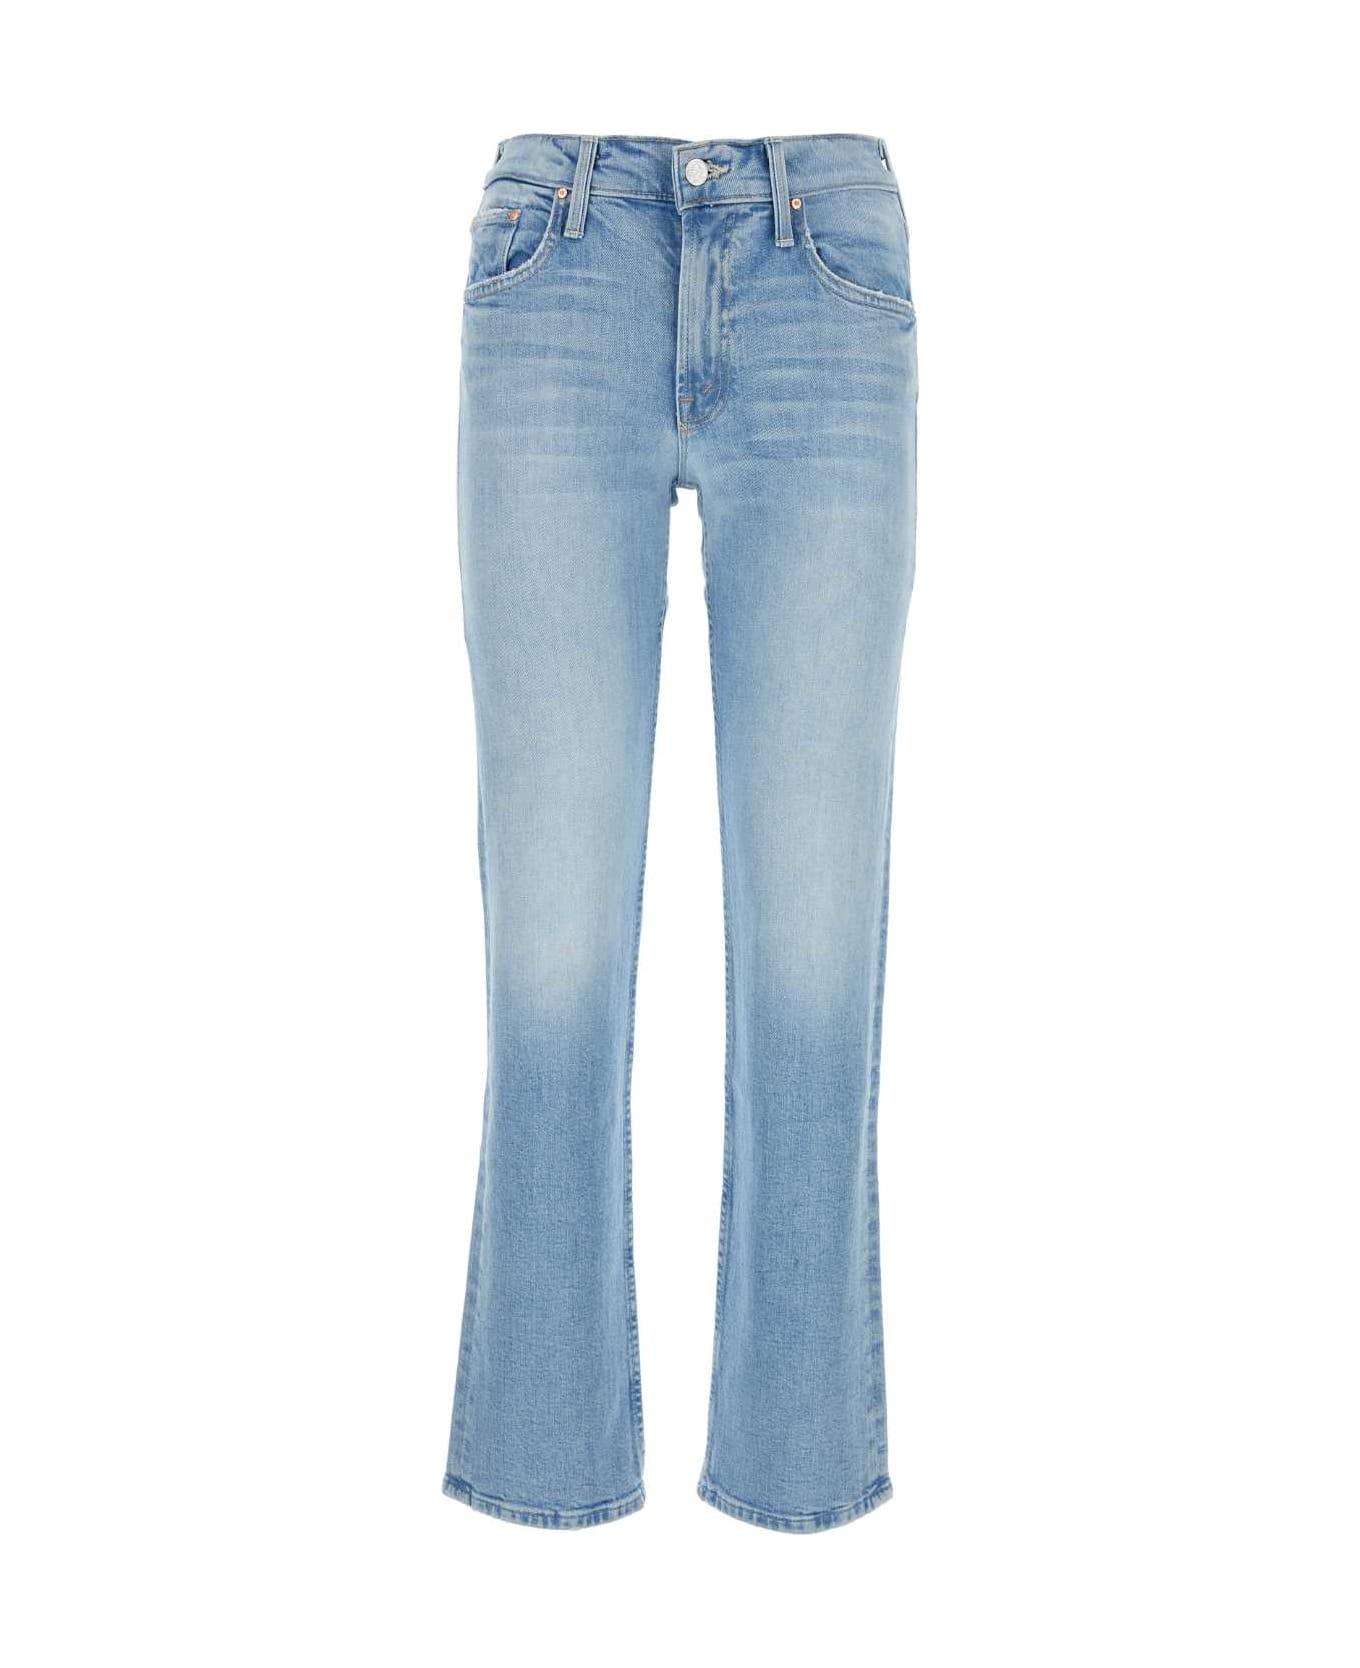 Mother Stretch Denim The Smarty Pants Jeans - AZZURRO